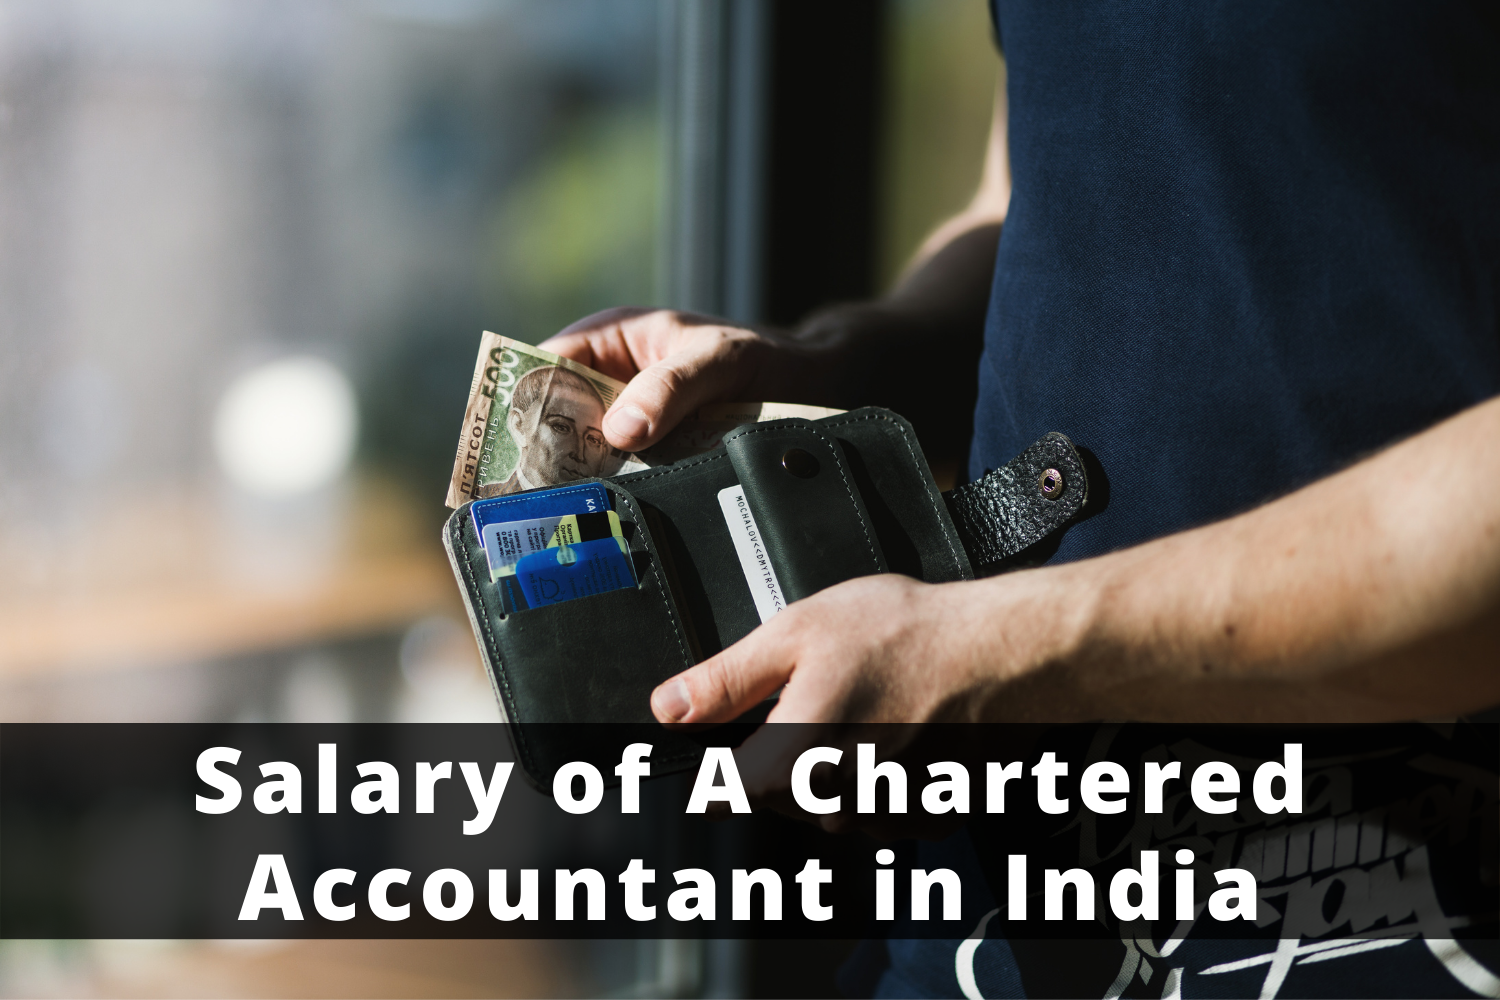 Chartered Accountant or CA Salary in India | CA annual salary in 2022